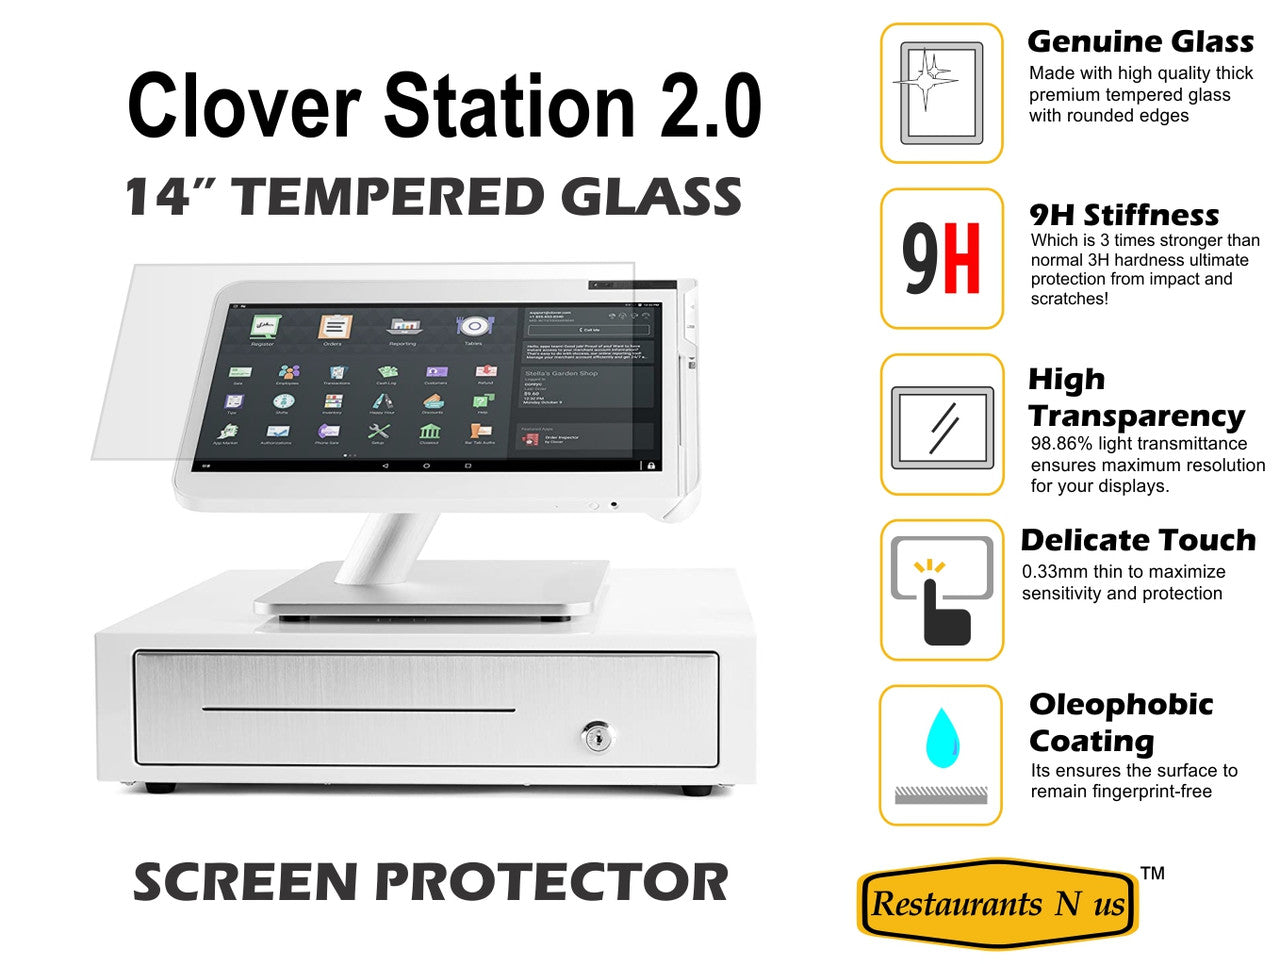 Clover Station 2.0 Tempered Glass 14" Screen Protector